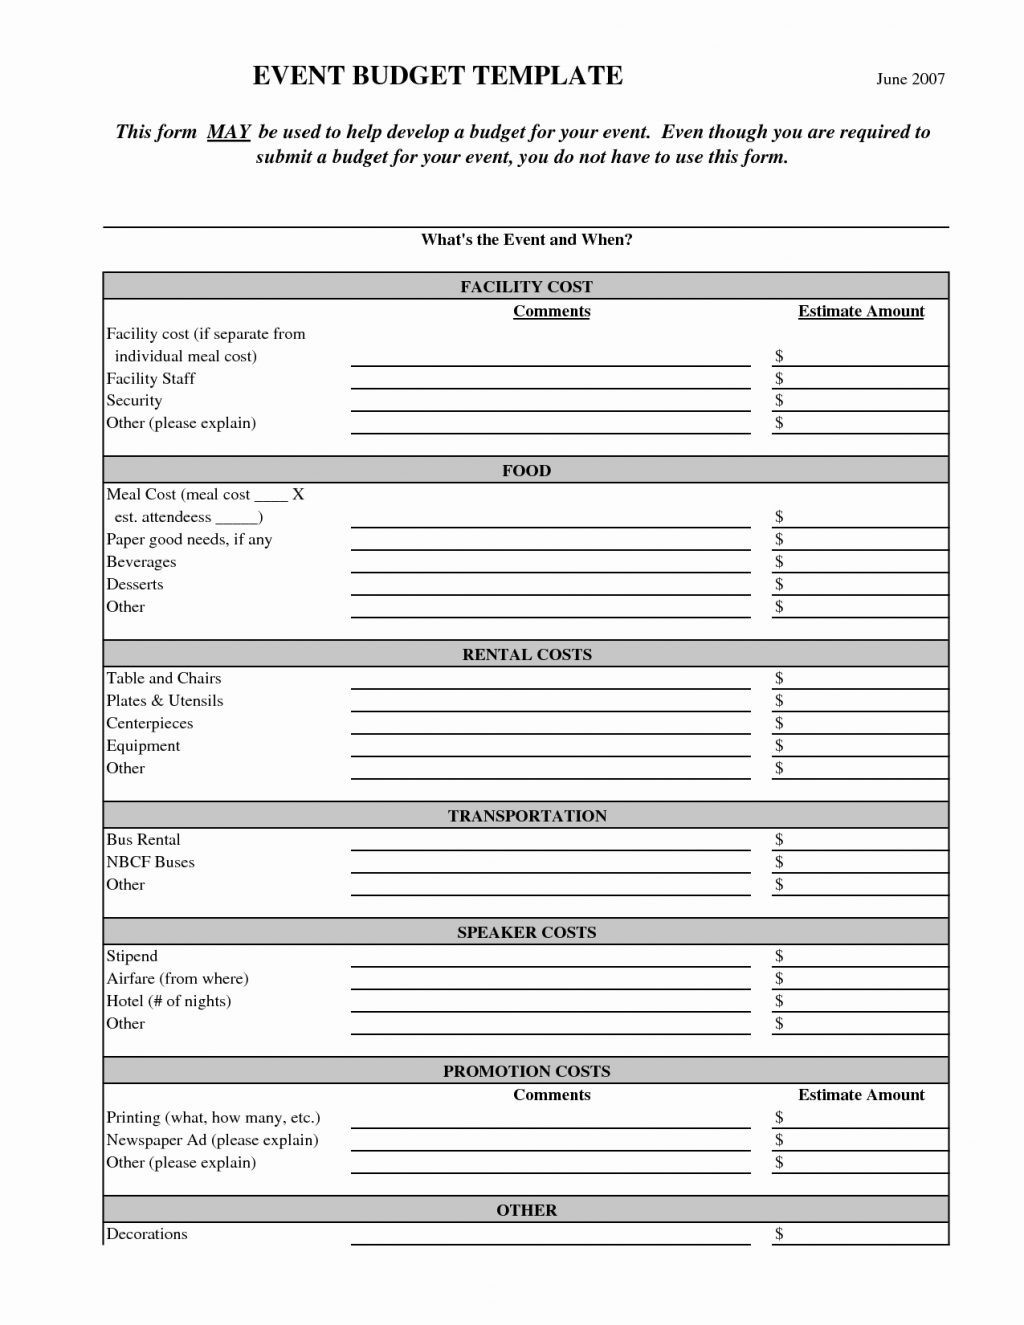 Event Ticket Sales Spreadsheet Template Regarding Business Plan Event Ticket Salesdsheet Template Downloadable Budget